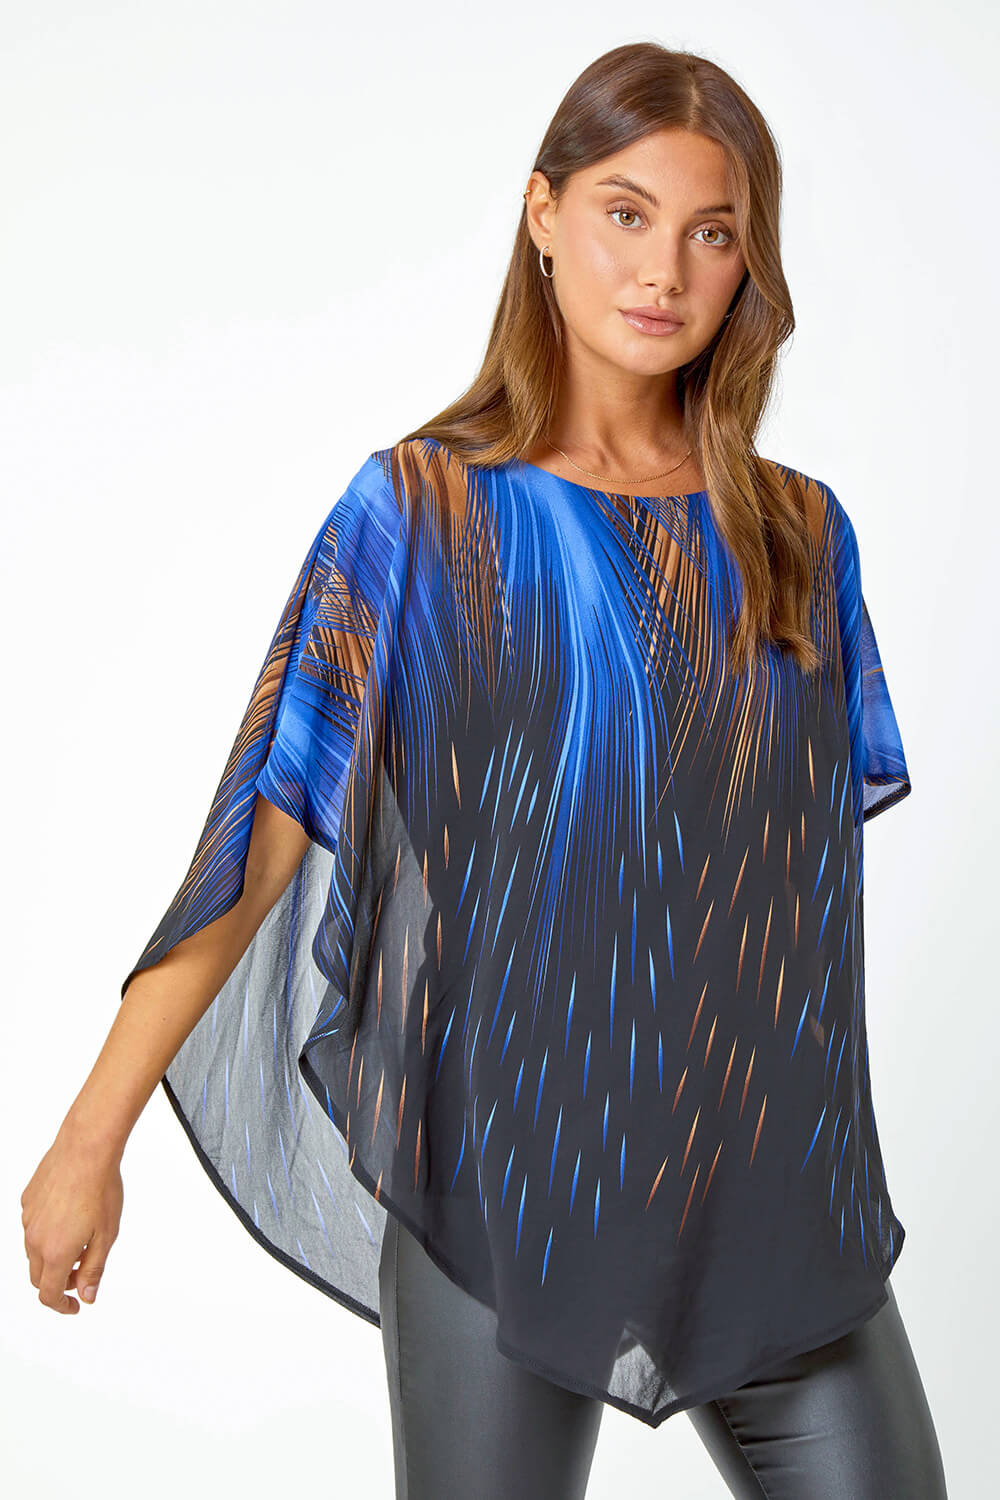 Abstract Chiffon Overlay Stretch Top